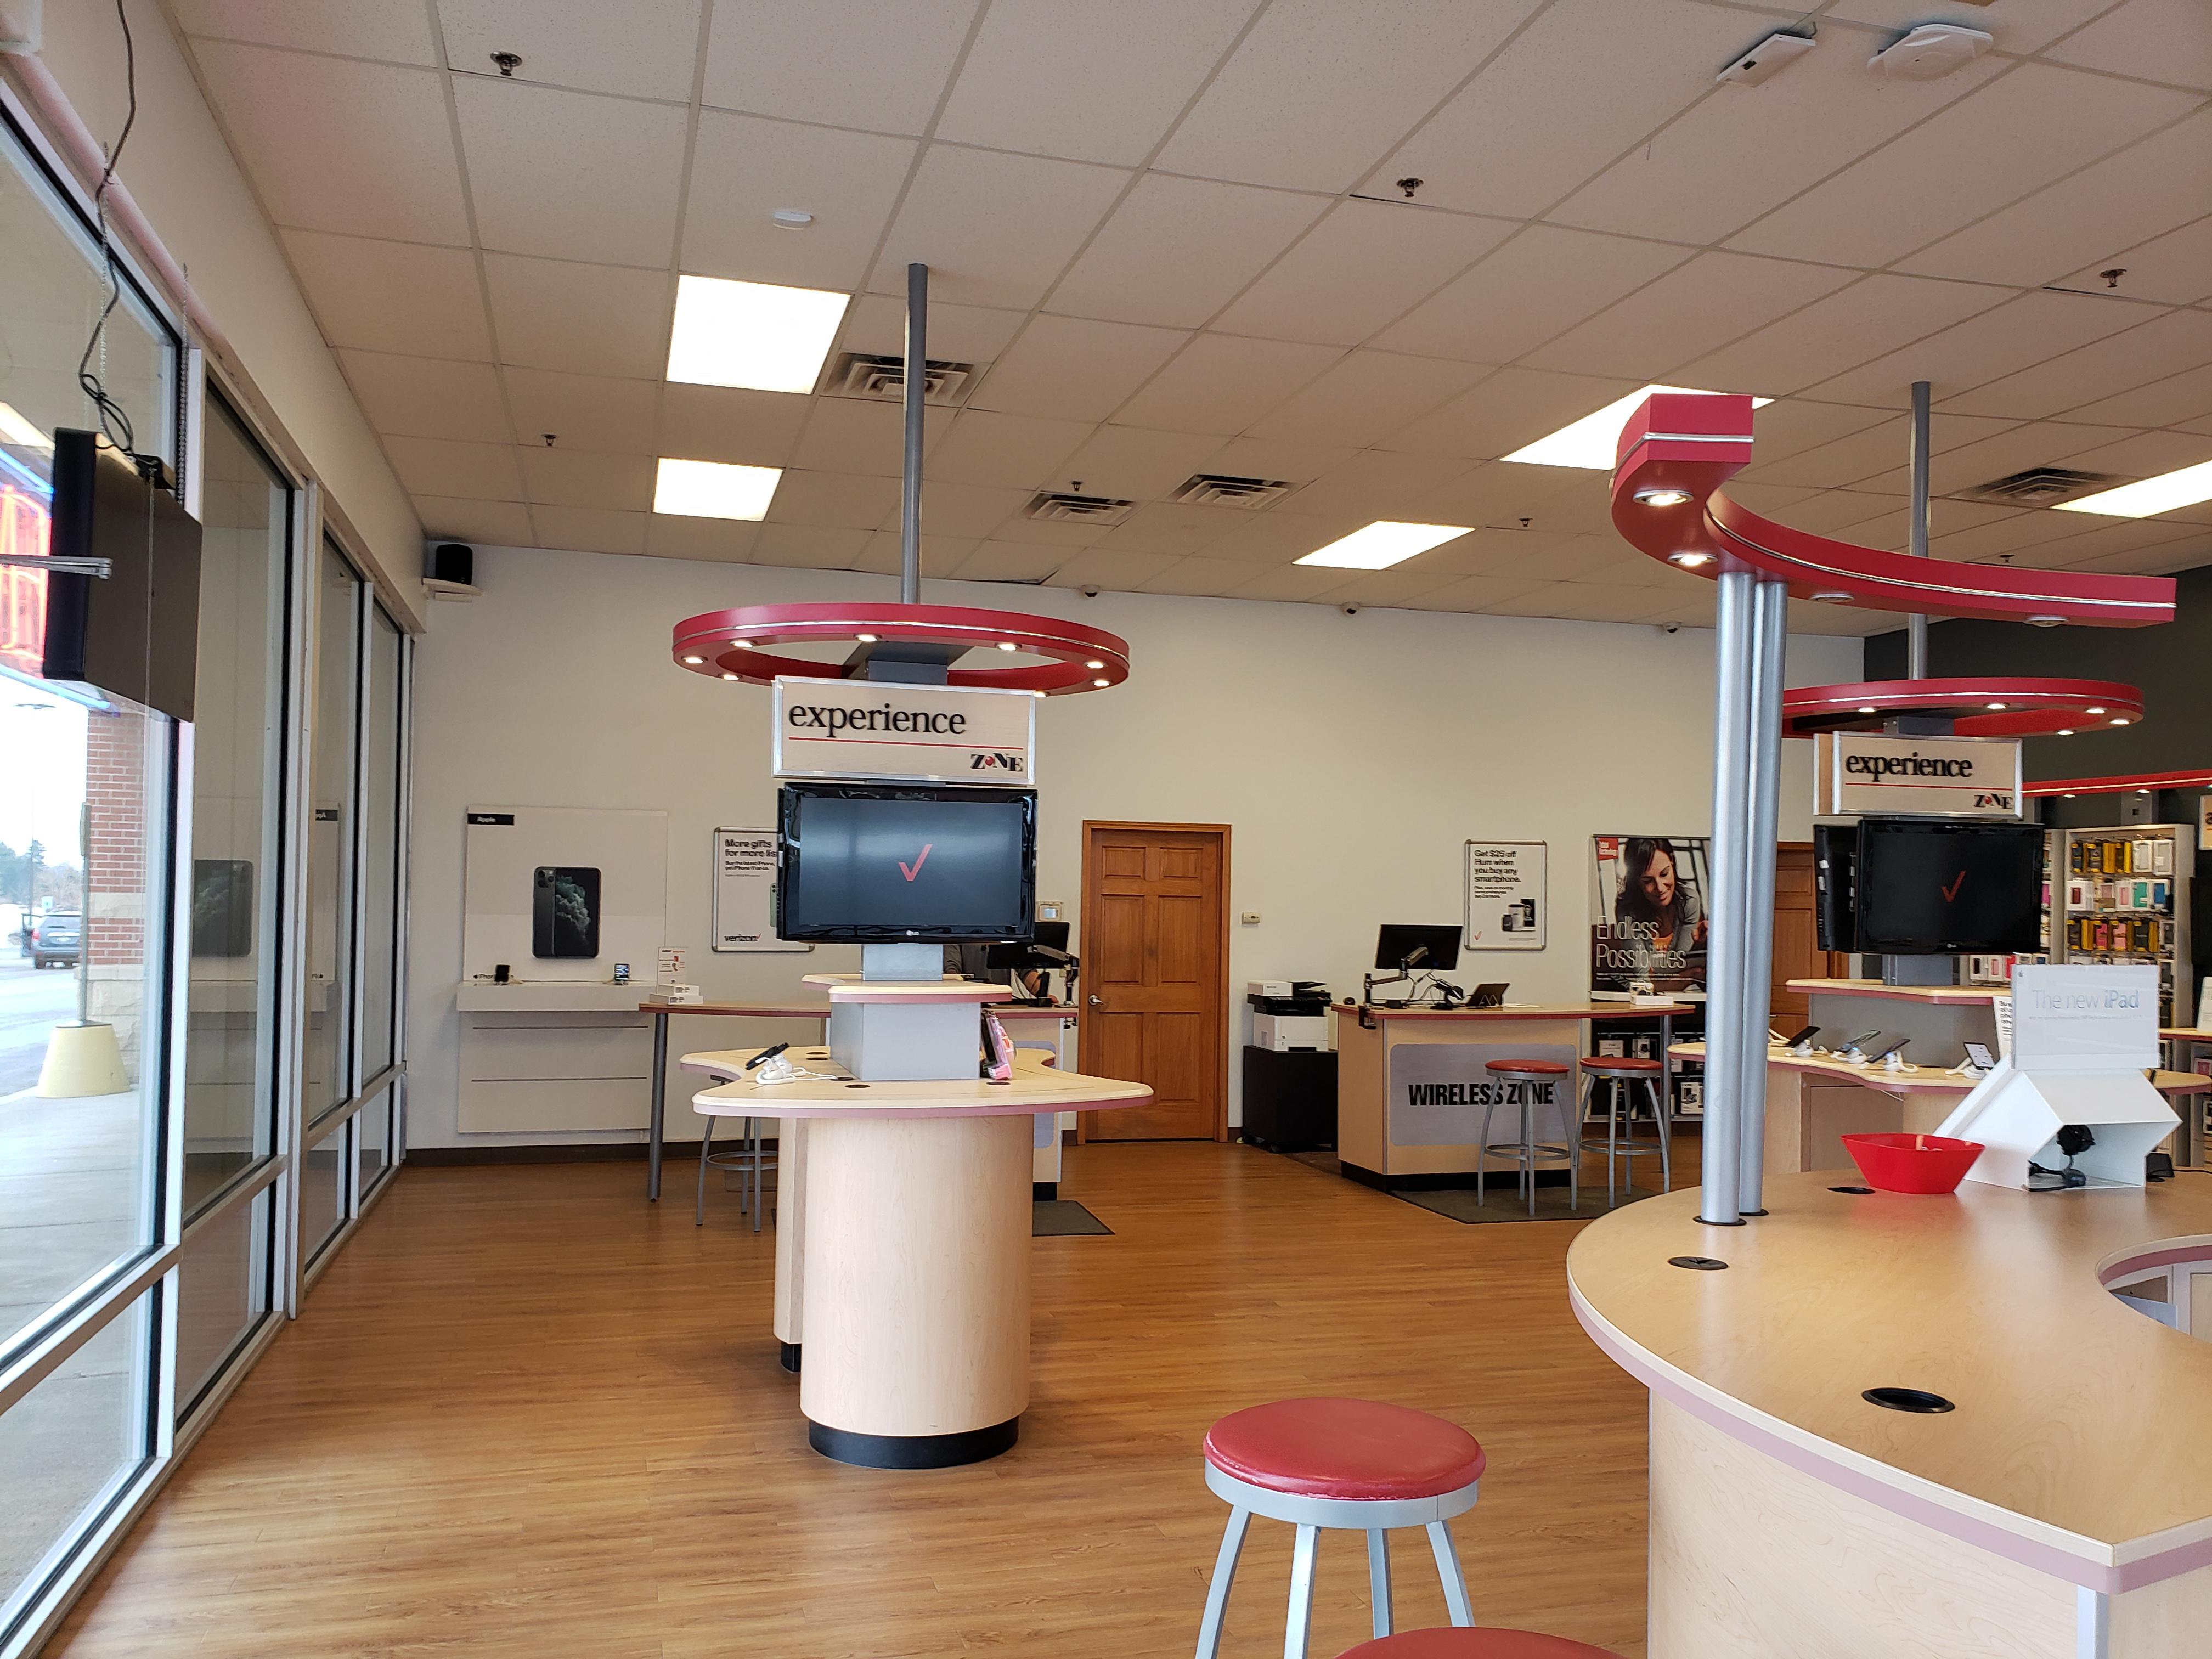 Come check out Wireless Zone® of Springville's new look!